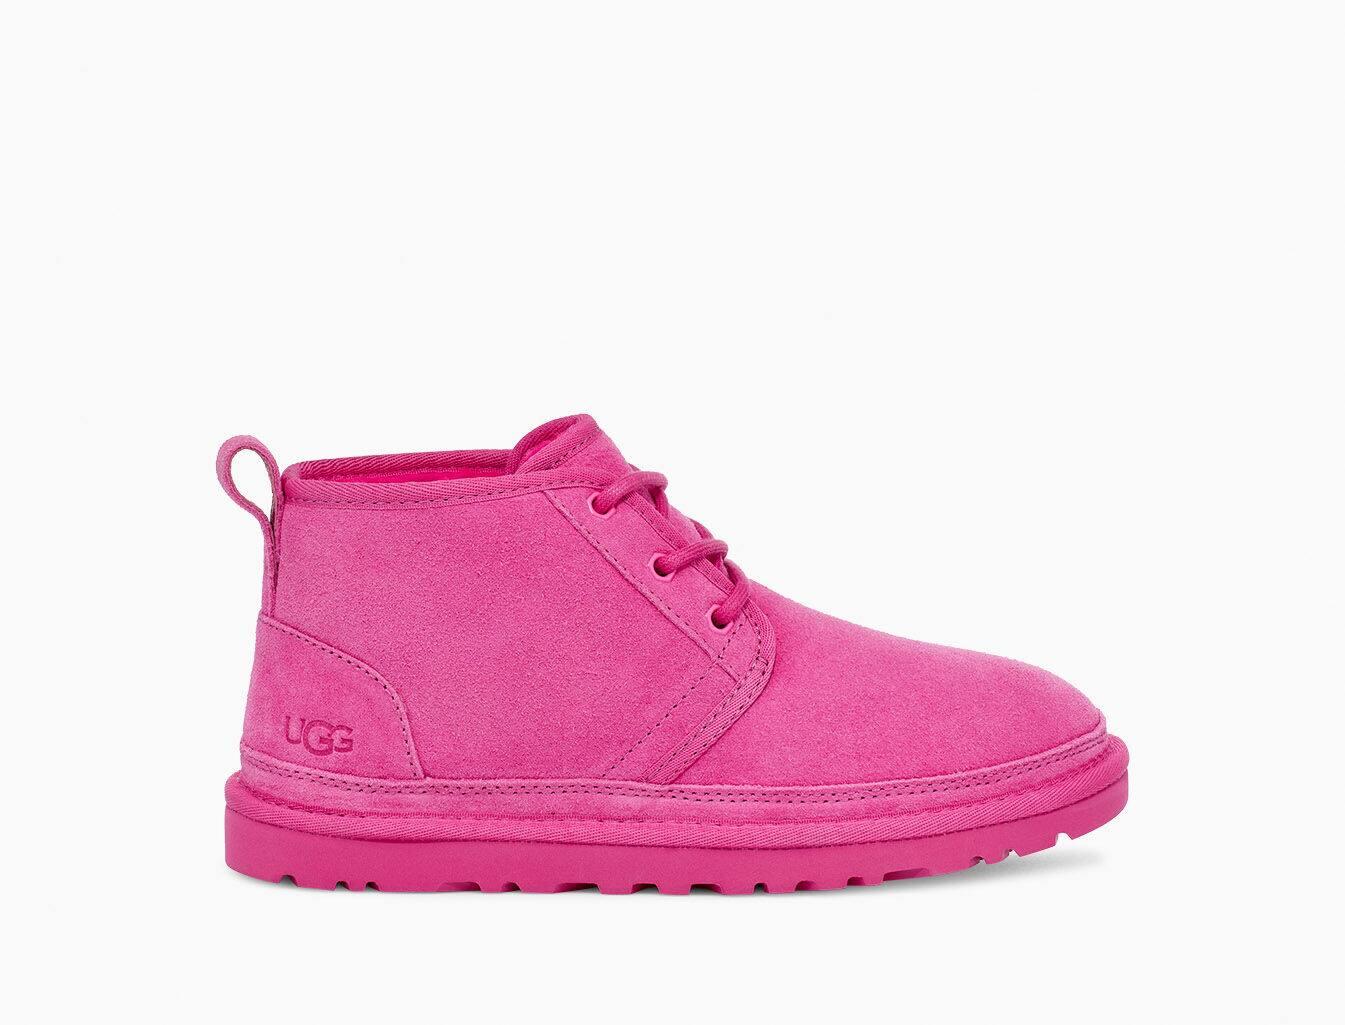 UGG Wool Neumel Boot in Pink - Lyst